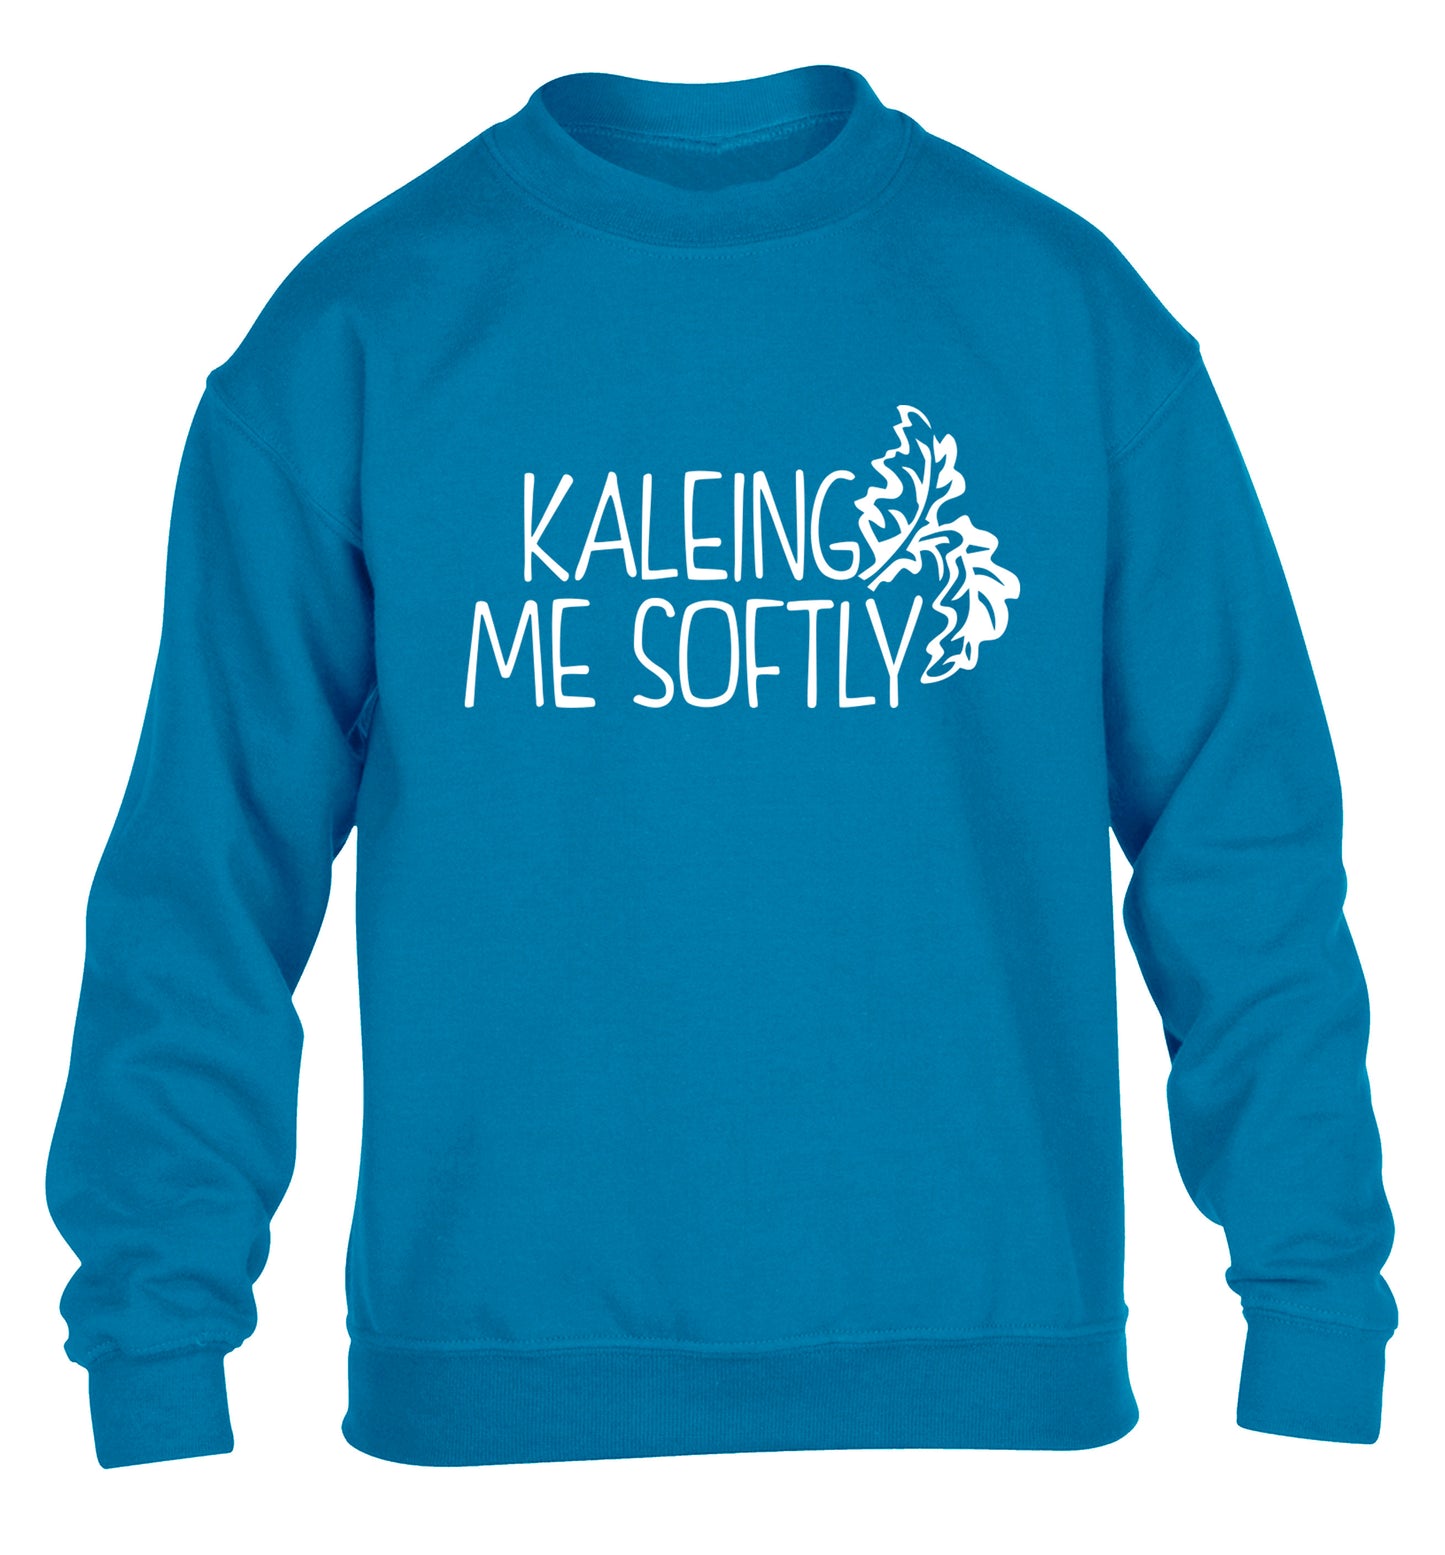 Kaleing me softly children's blue sweater 12-14 Years